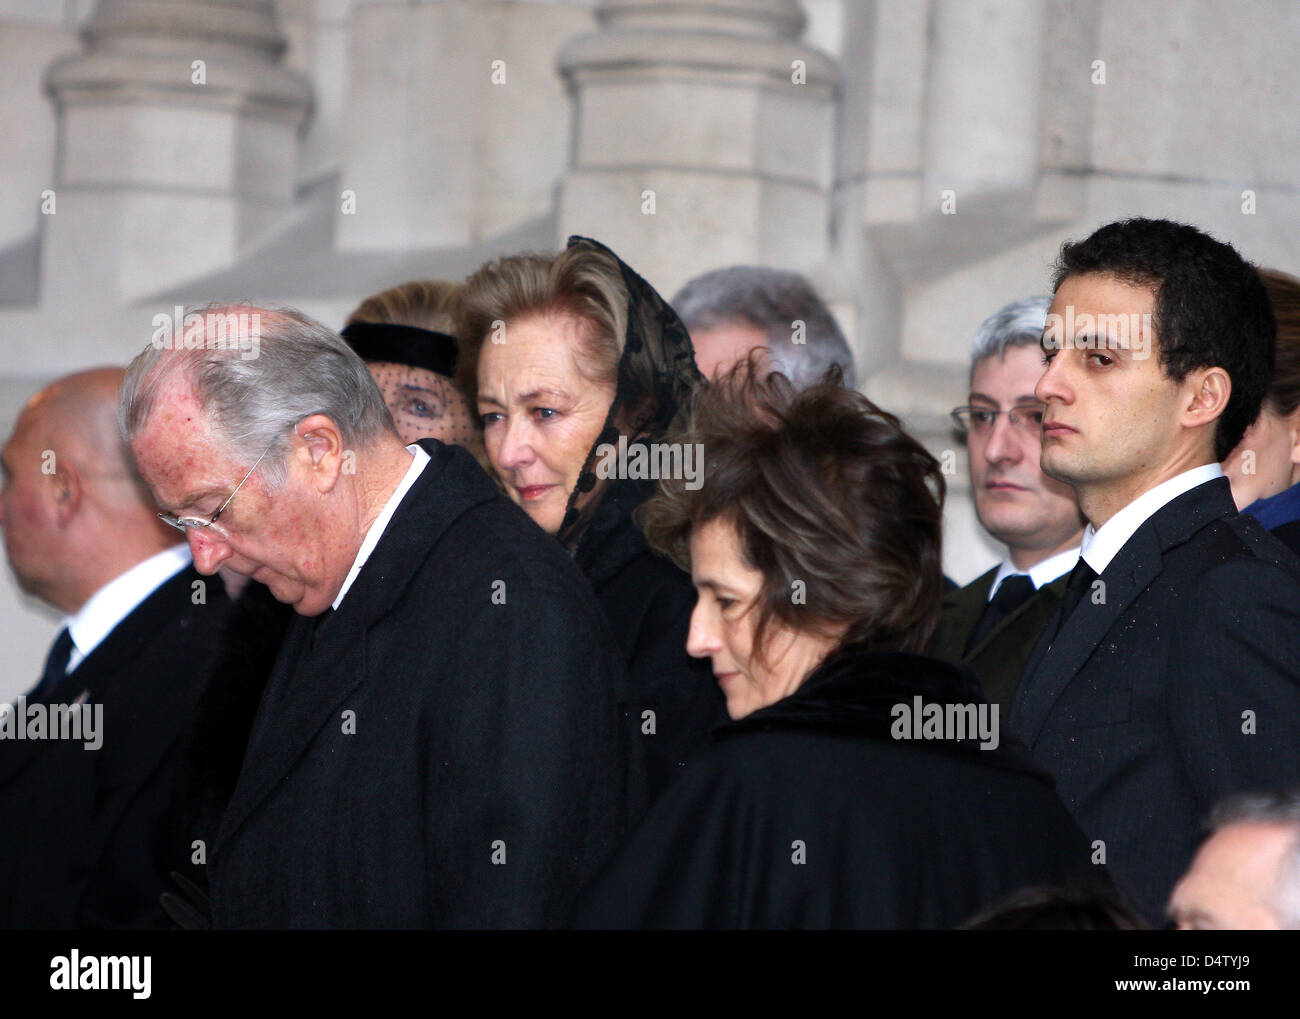 Queen Paola (3-L) and her husband King Albert of Belgium (2-L) attend the funeral ceremony of Princess Lea's late husband Prince Alexander of Belgium in Laken, Belgium, 04 December 2009. Prince Alexander died on 29 November 2009. He was the half-brother of King Albert II of Belgium. Photo: Albert Nieboer (NETHERLANDS OUT) Stock Photo